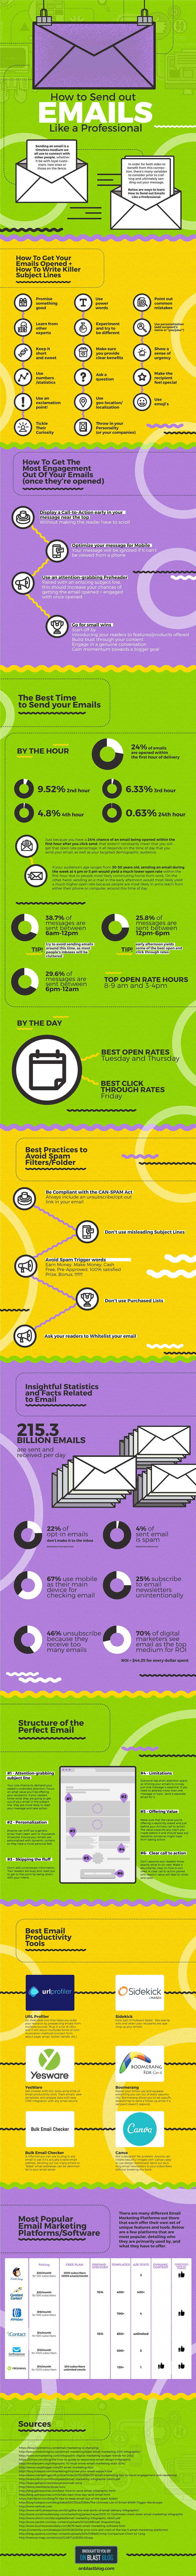 Email Marketing Infographic